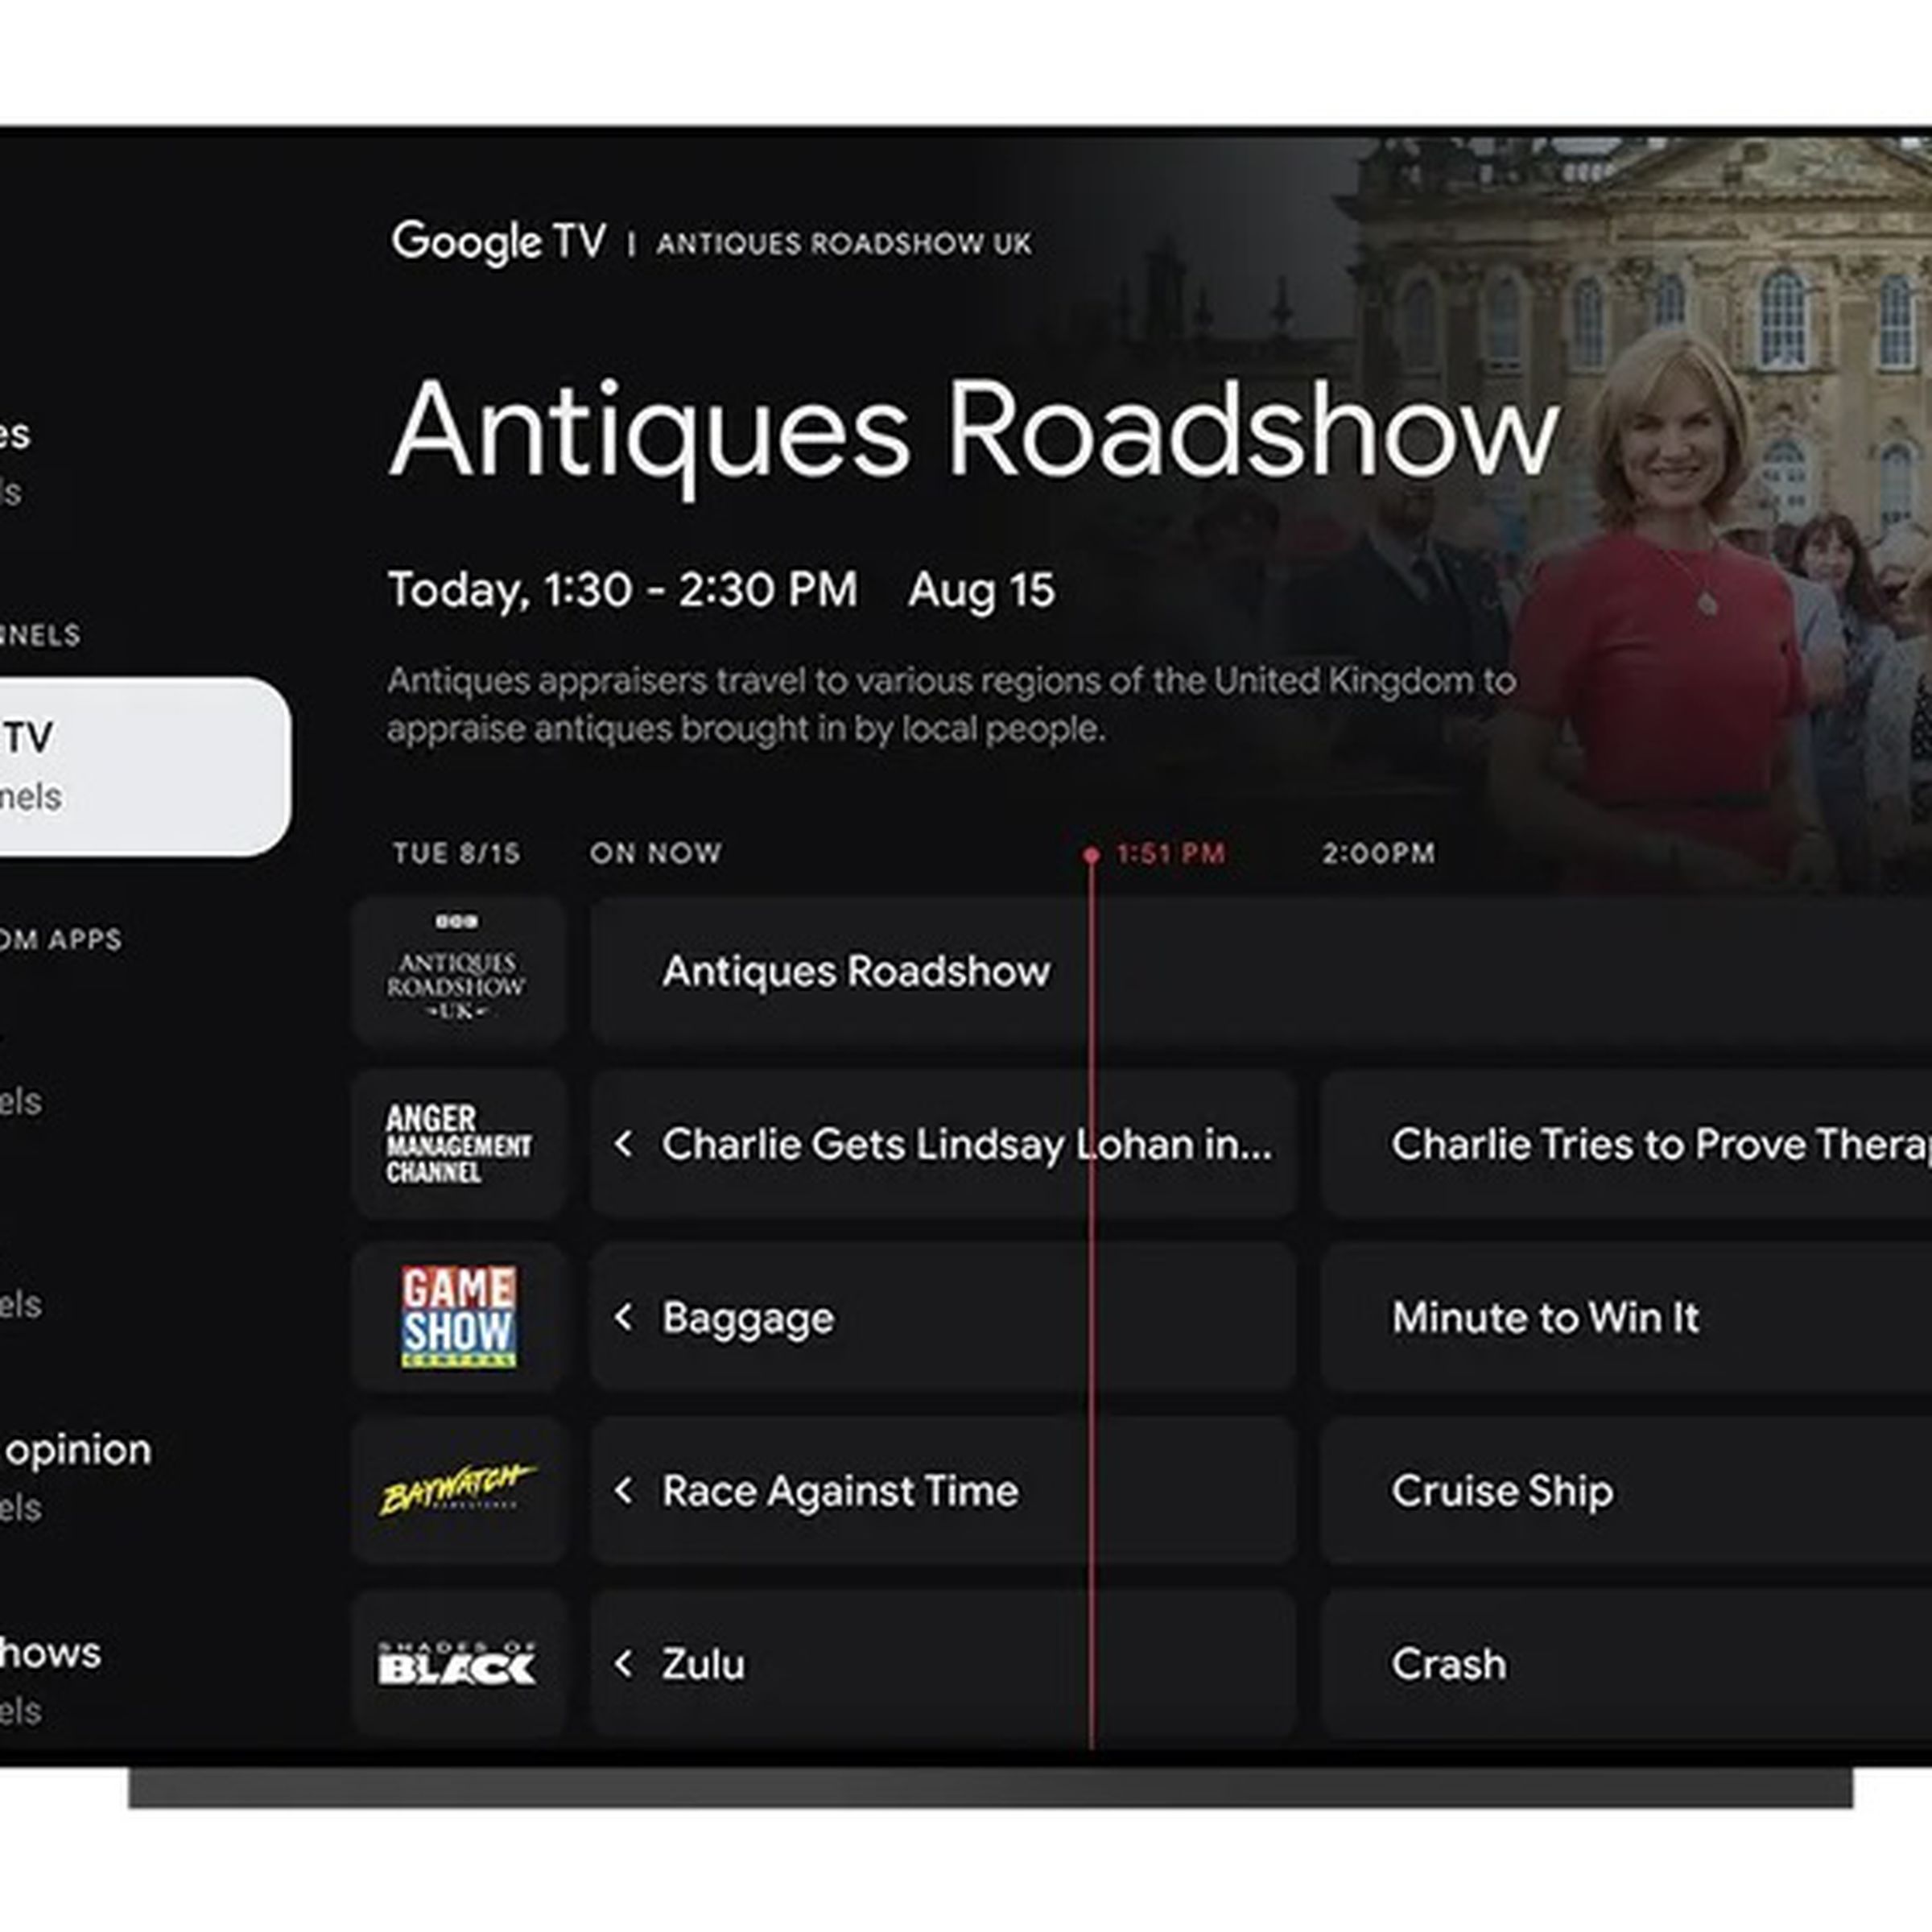 Google TV interface showing a preview of Antiques Roadshow